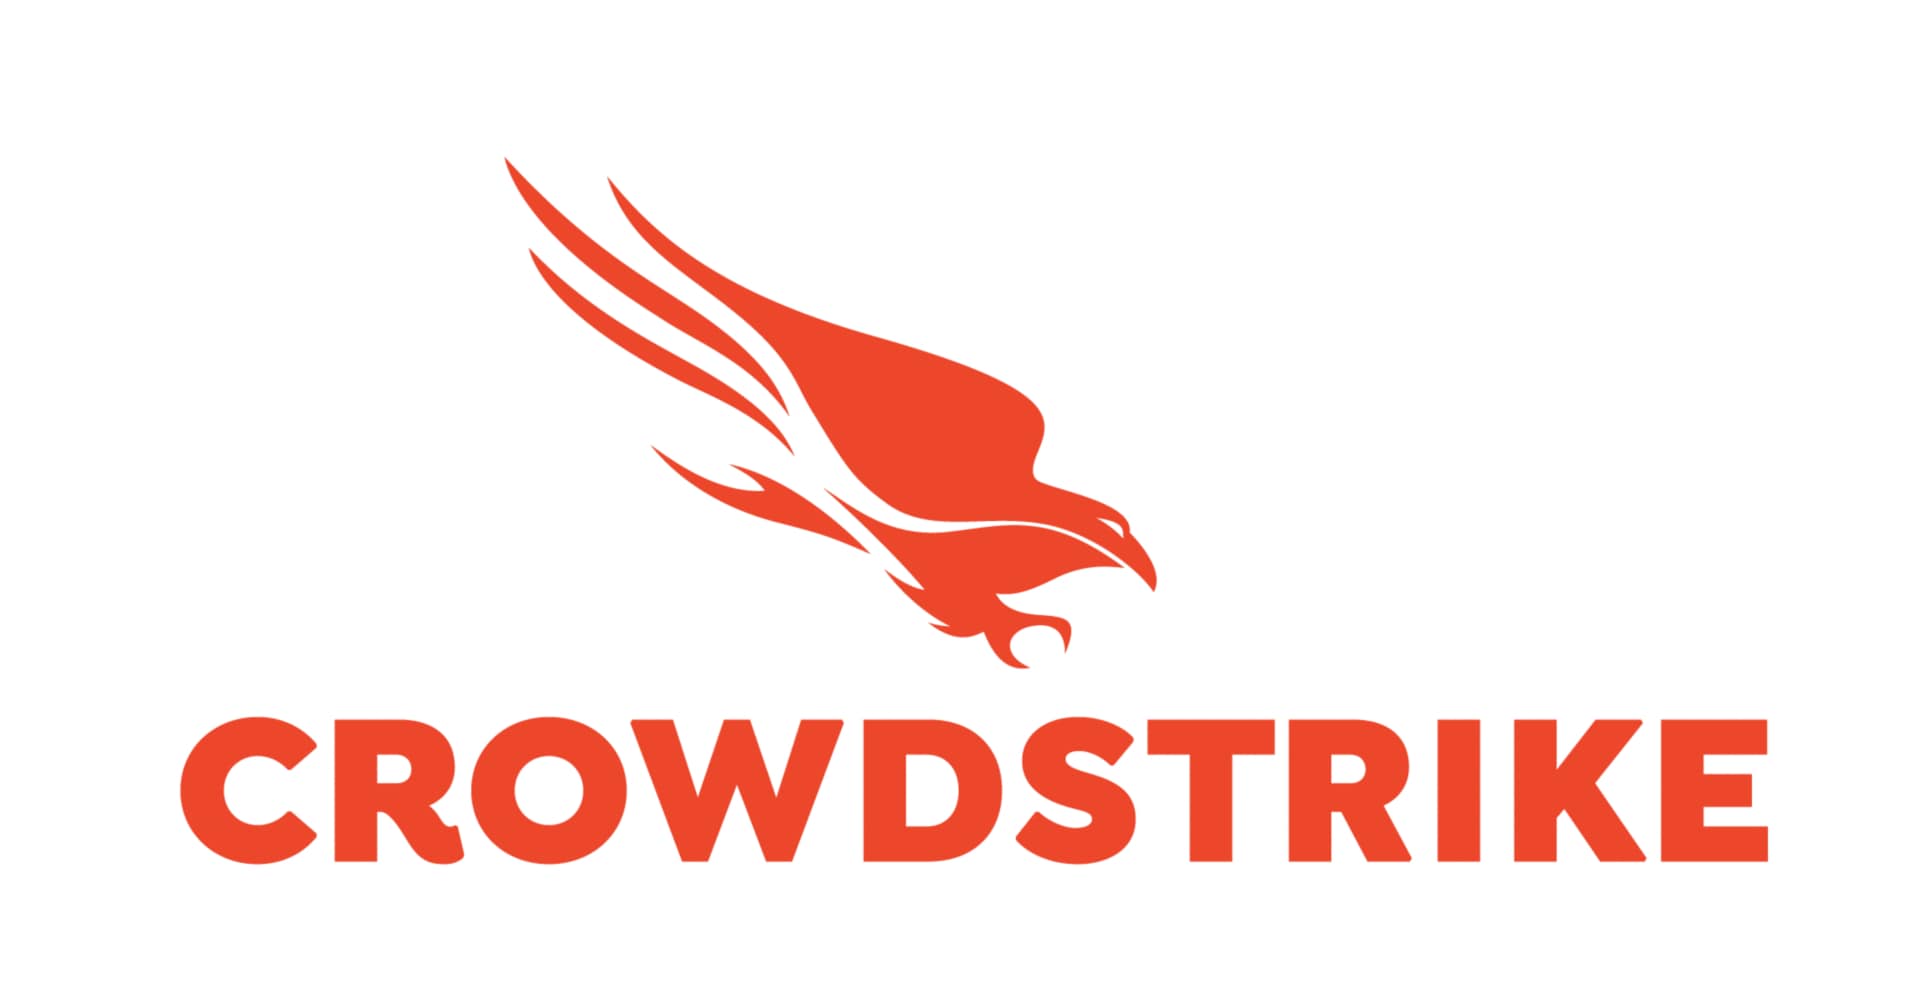 CrowdStrike 6-Month Falcon Firewall Management Software  (300-499 Licenses)